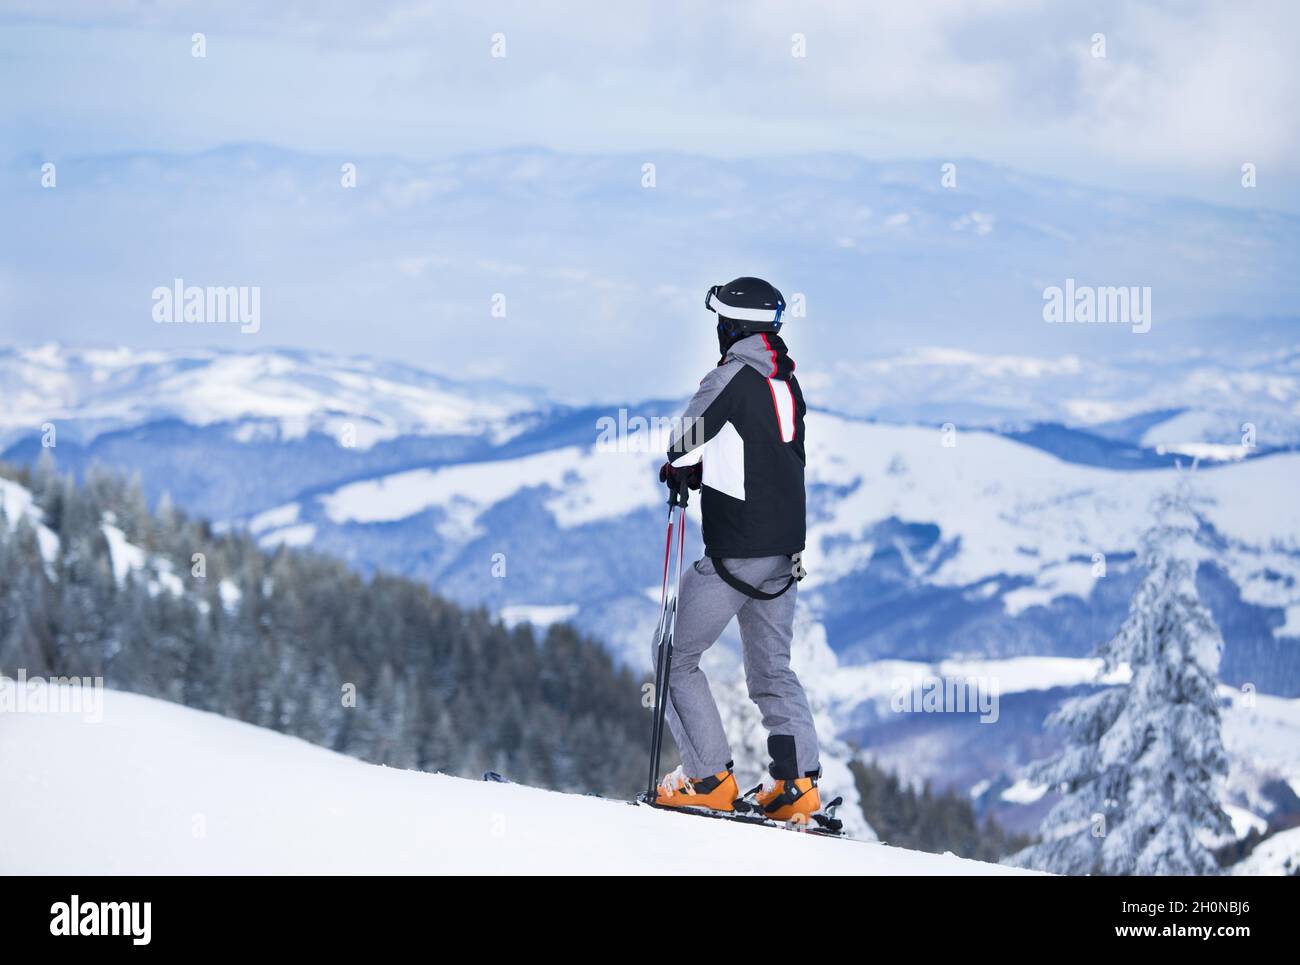 Rear view of man on ski resting and enjoying view of mountains and trees with snow. Winter recreation on holiday Stock Photo